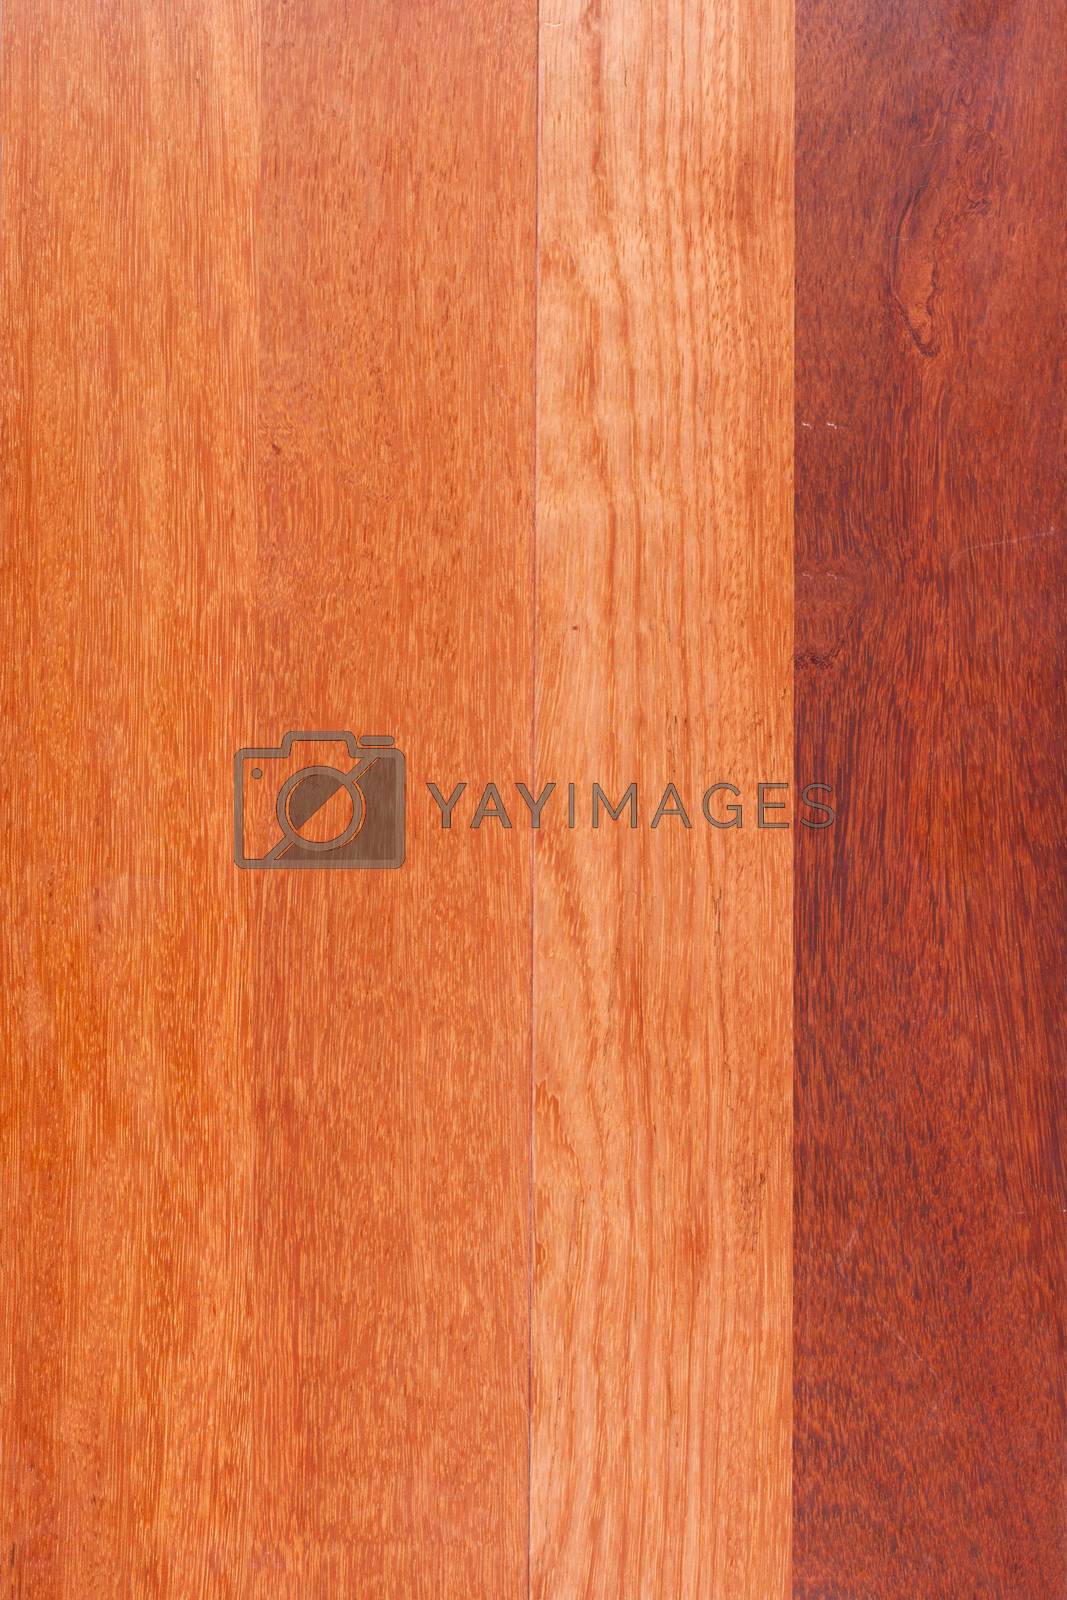 Royalty free image of parquet texture by marylooo